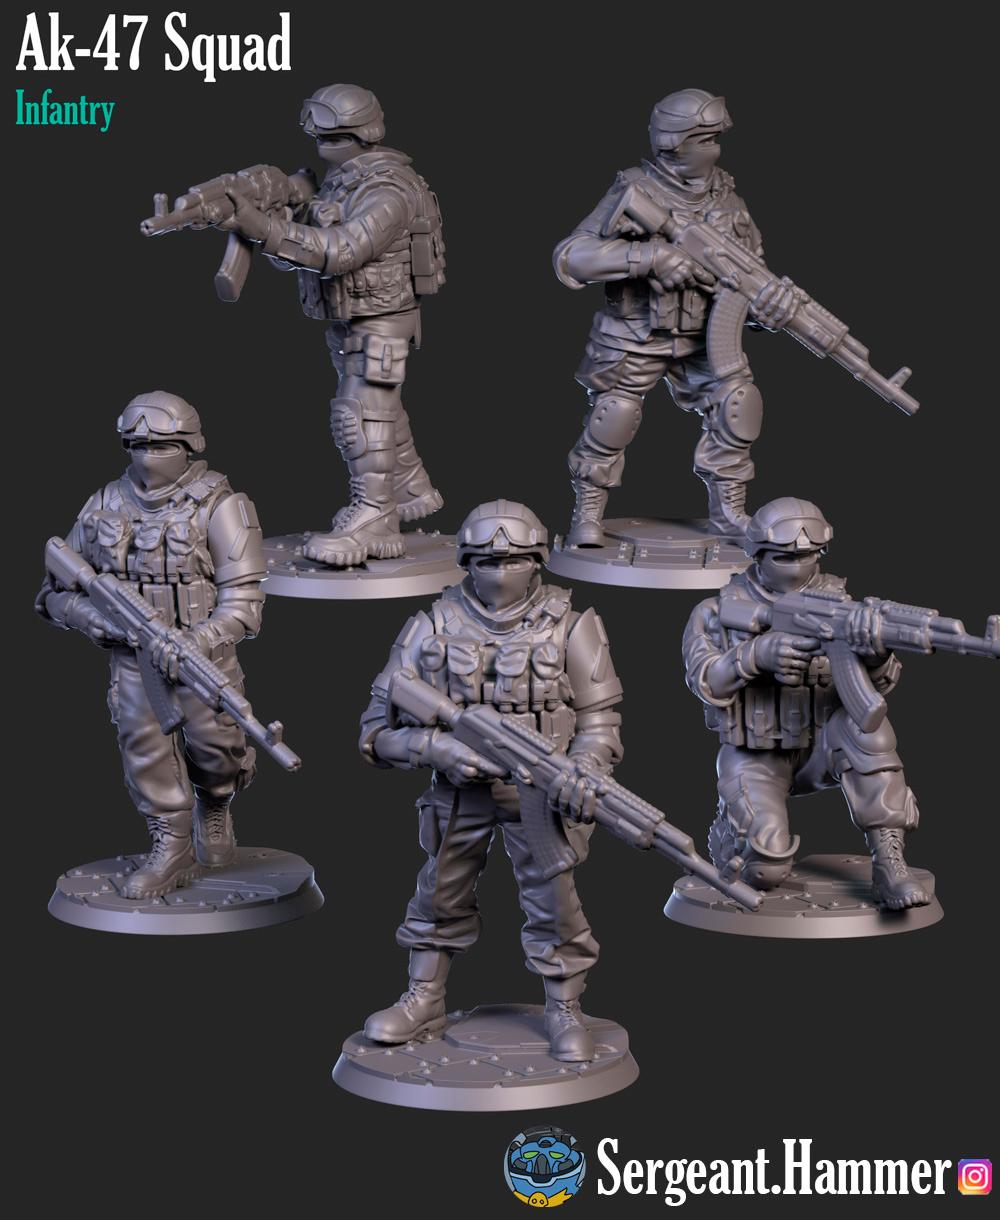 Modern Soldiers with ak 47 3d model